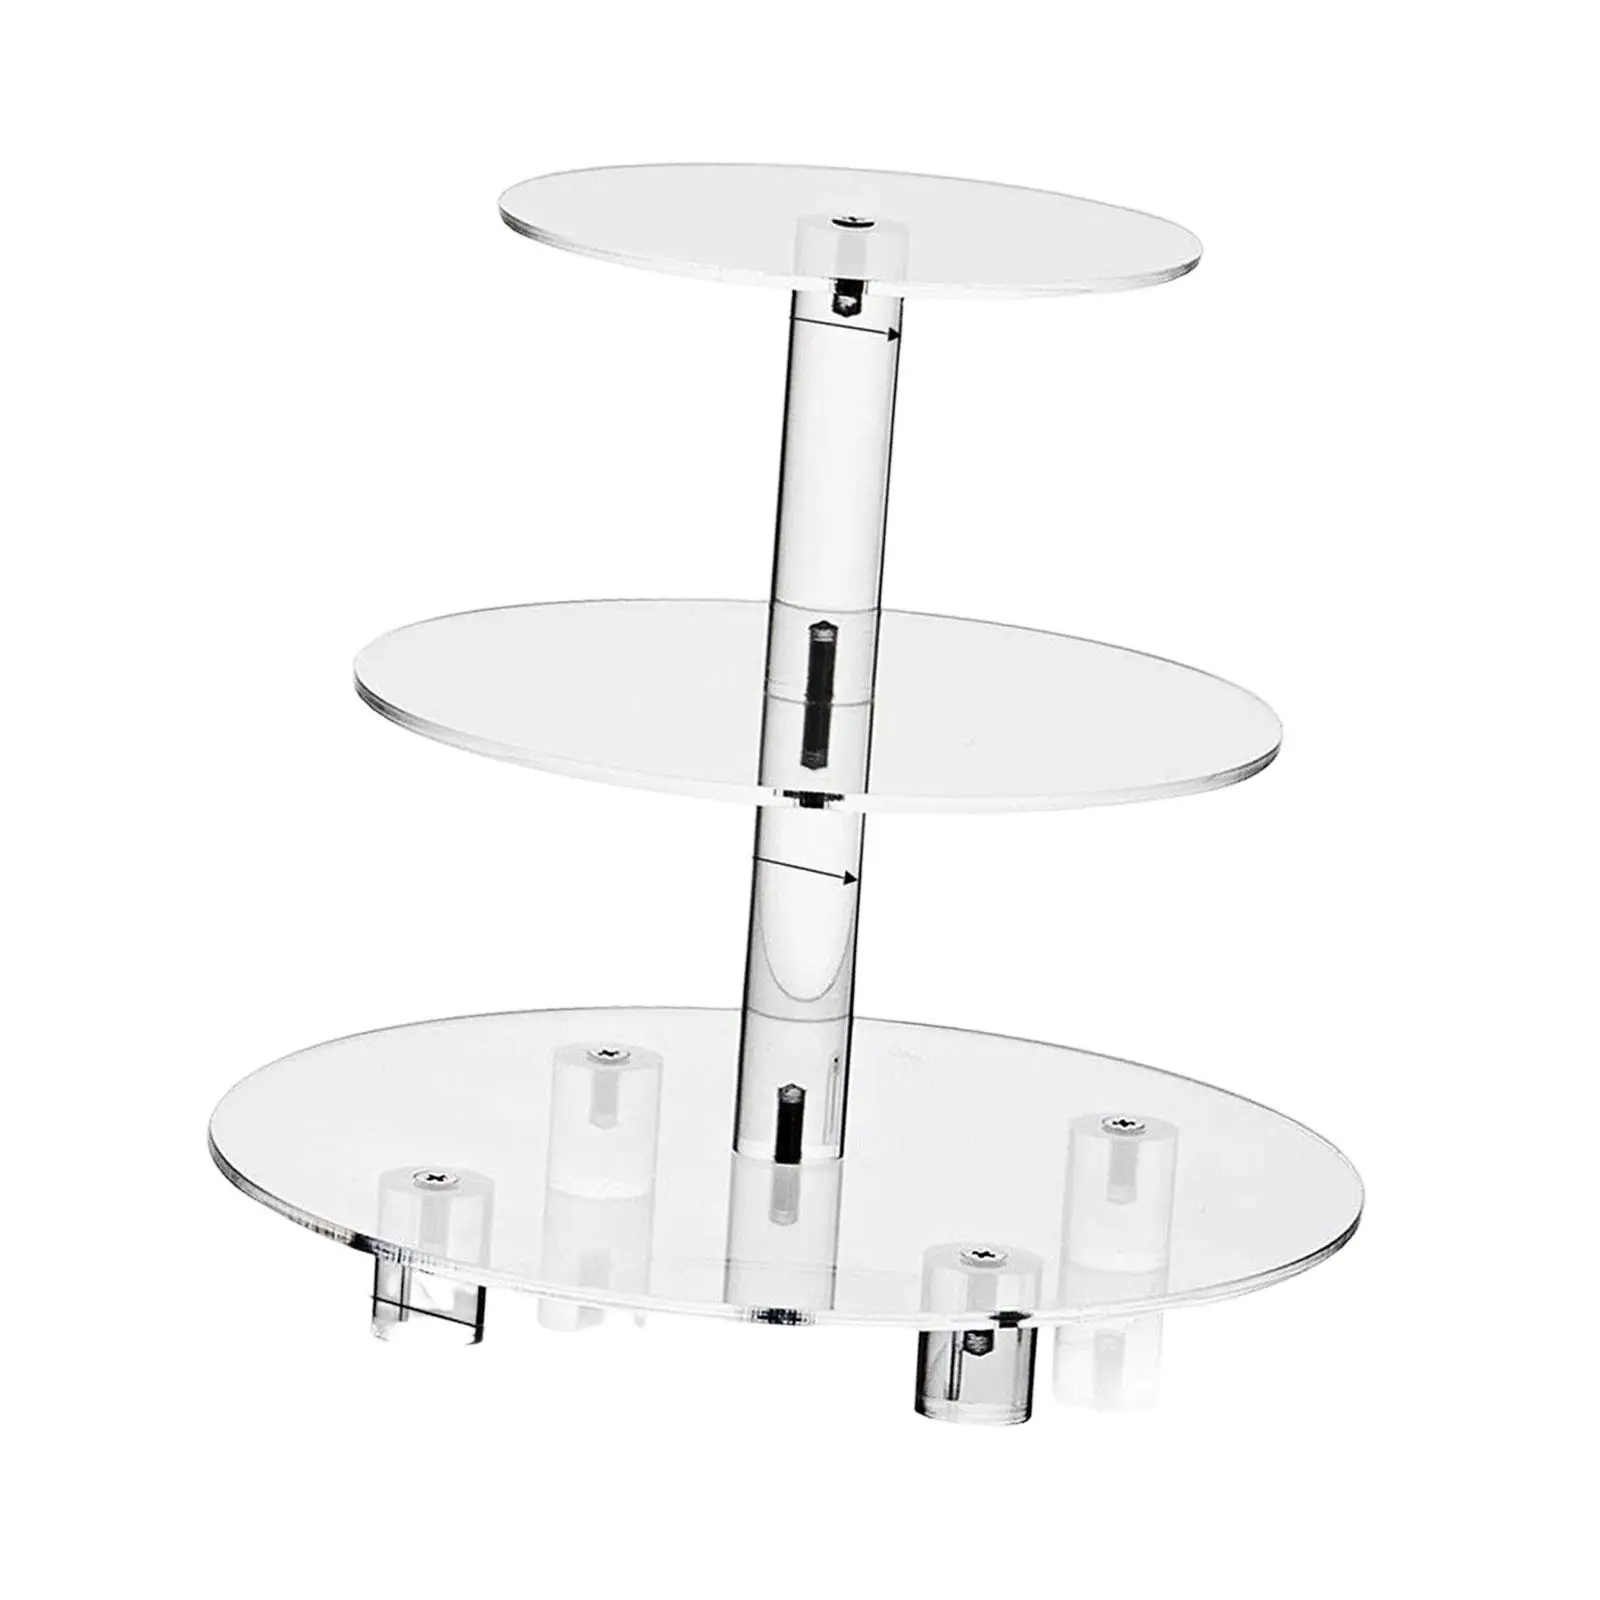 Acrylic Cake Stand Display Stand Detachable Cupcake Stand for Baby Showers